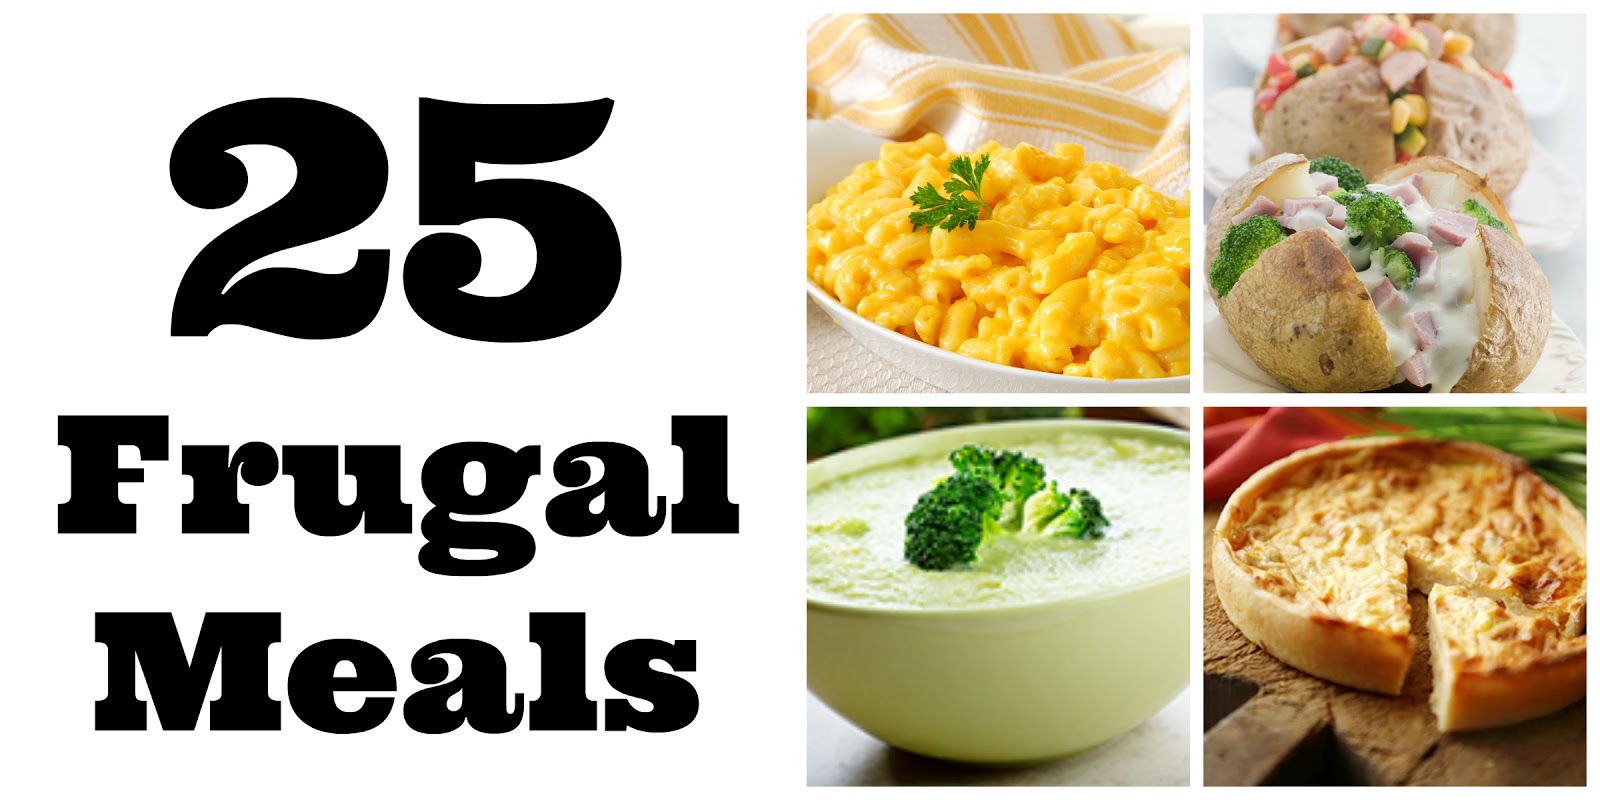 25 Frugal Meals for Families and Kids